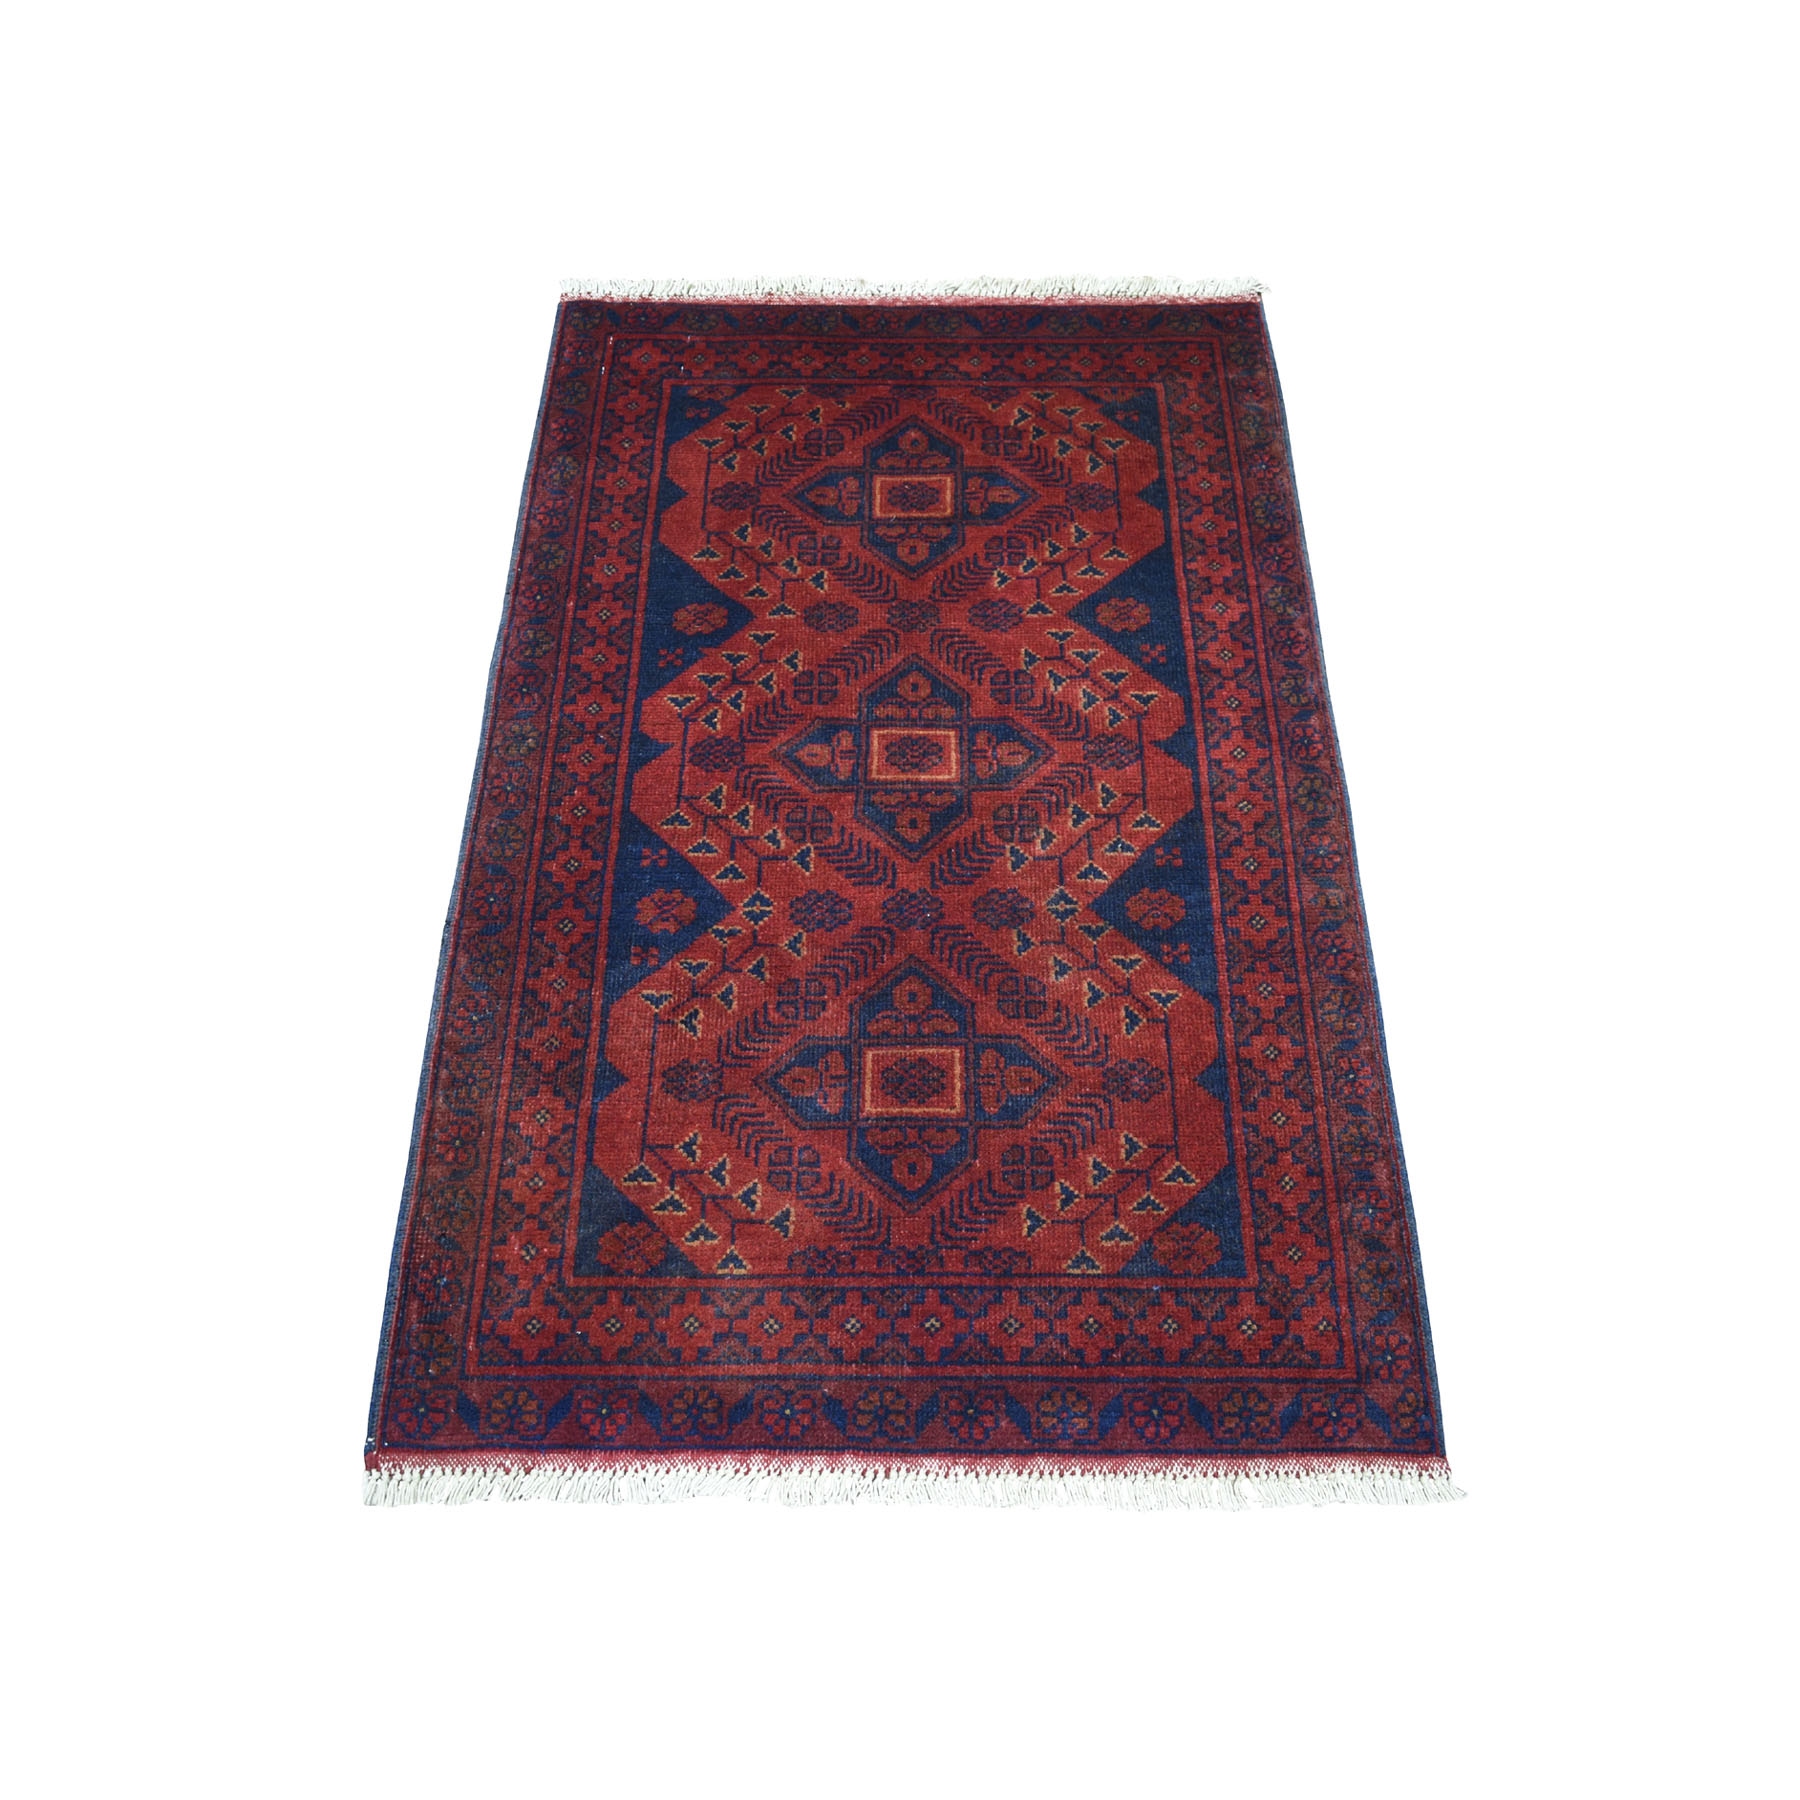 2'7"X4' Deep And Saturated Red Geometric Afghan Andkhoy Pure Wool Hand Knotted Oriental Rug moaece08